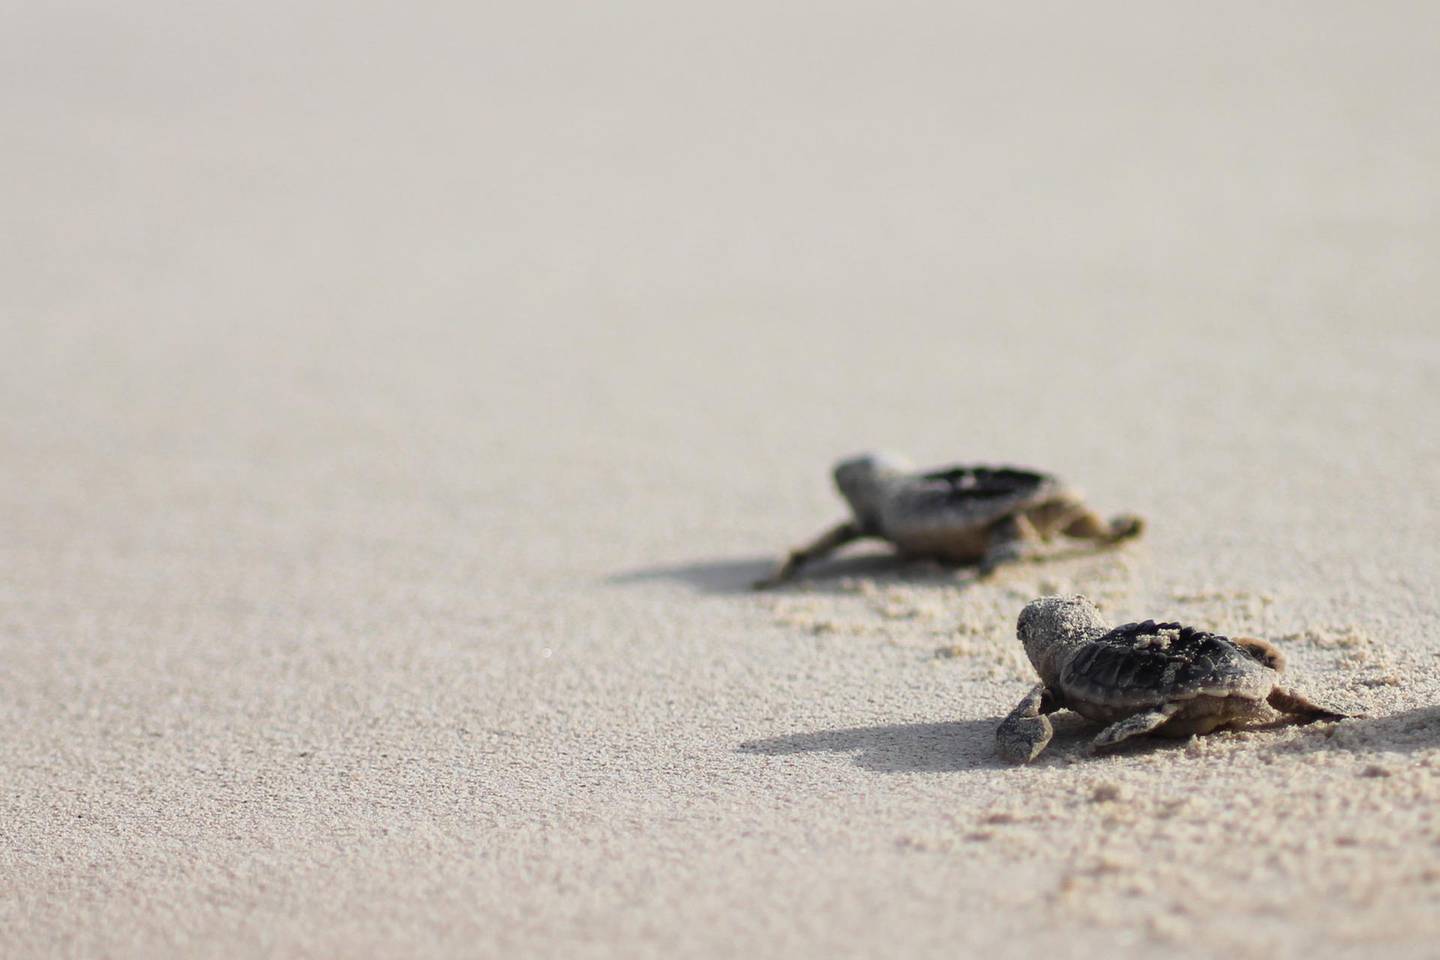 Abu Dhabi, July 6, 2015 ˆTourism Development & Investment Company (TDIC), has announced the successful hatching of the first Hawksbill turtle nest on Saadiyat Beach for this year. Over 80 baby turtles emerged from the nest, which is located adjacent to the Park Hyatt Abu Dhabi Hotel and Villas on Saadiyat Beach.
 
Dr Nathalie Staelens, Head of Environmental Services at TDIC, said: „We are very happy that the eggs ˆ which are from this season‚s first batch ˆ have hatched safely. 

Courtesy TDIC  *** Local Caption ***  on07jl-turtles2.JPG